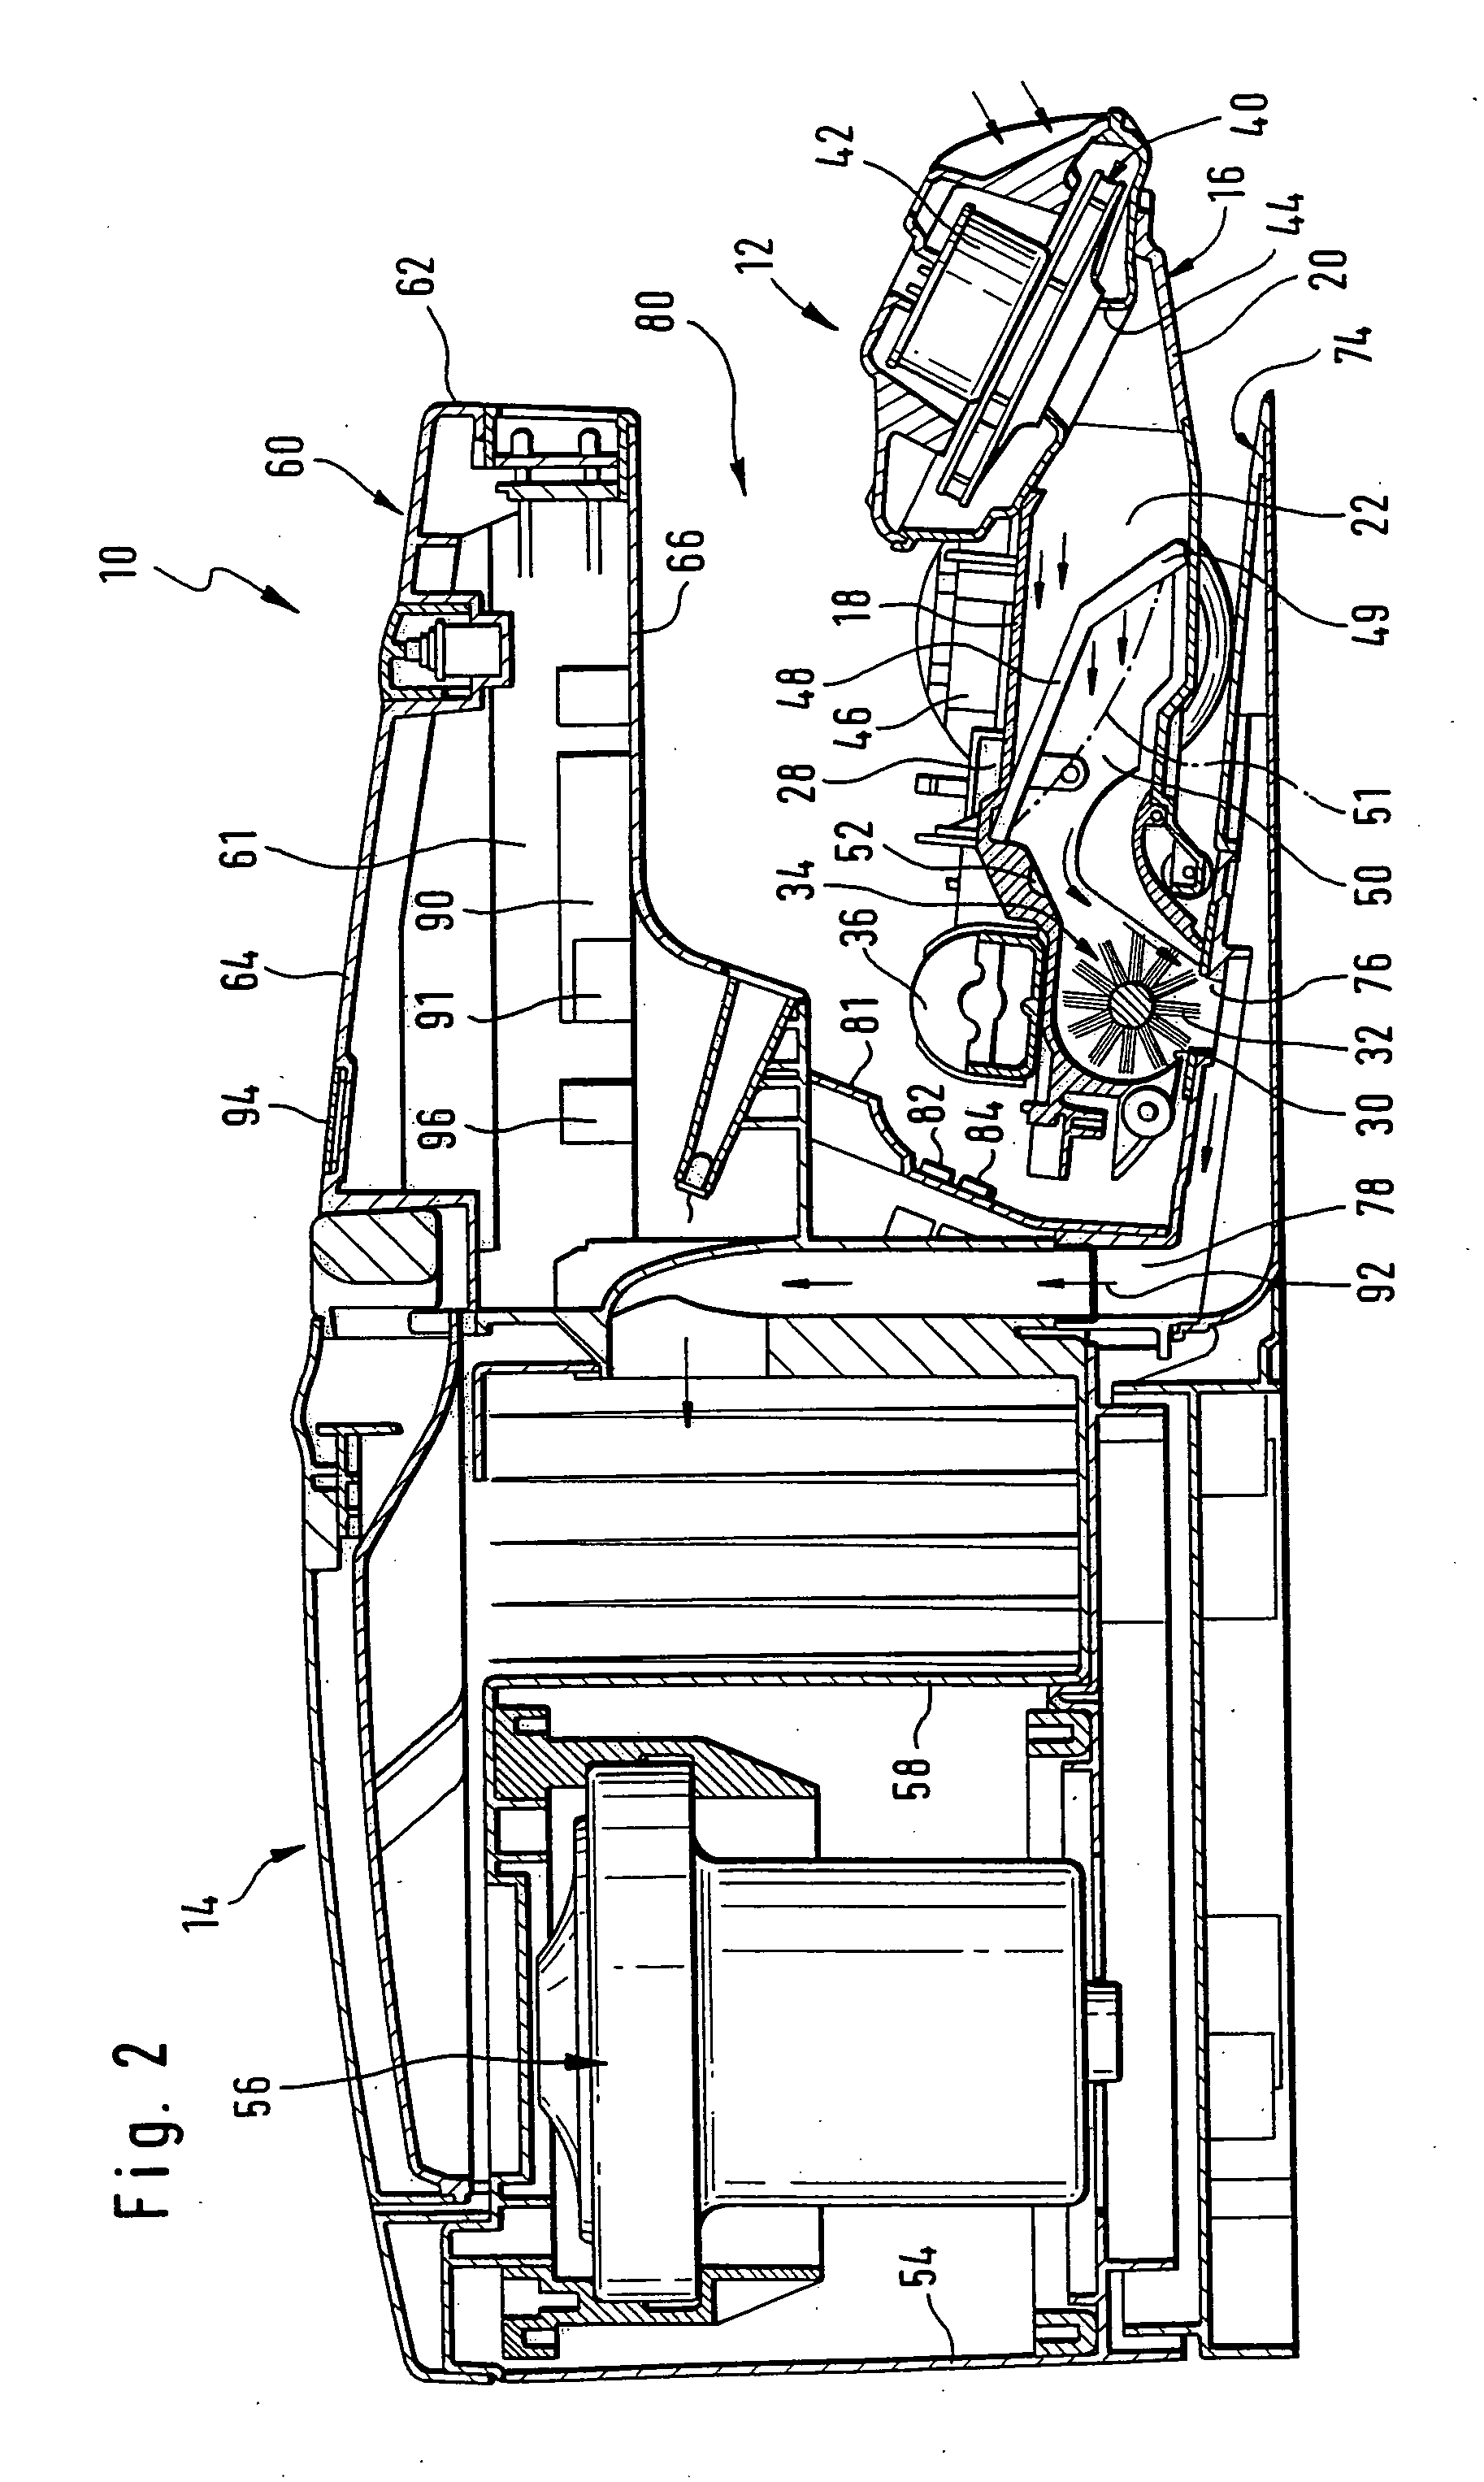 Method for operating a floor cleaning system, and floor cleaning system for use of the method